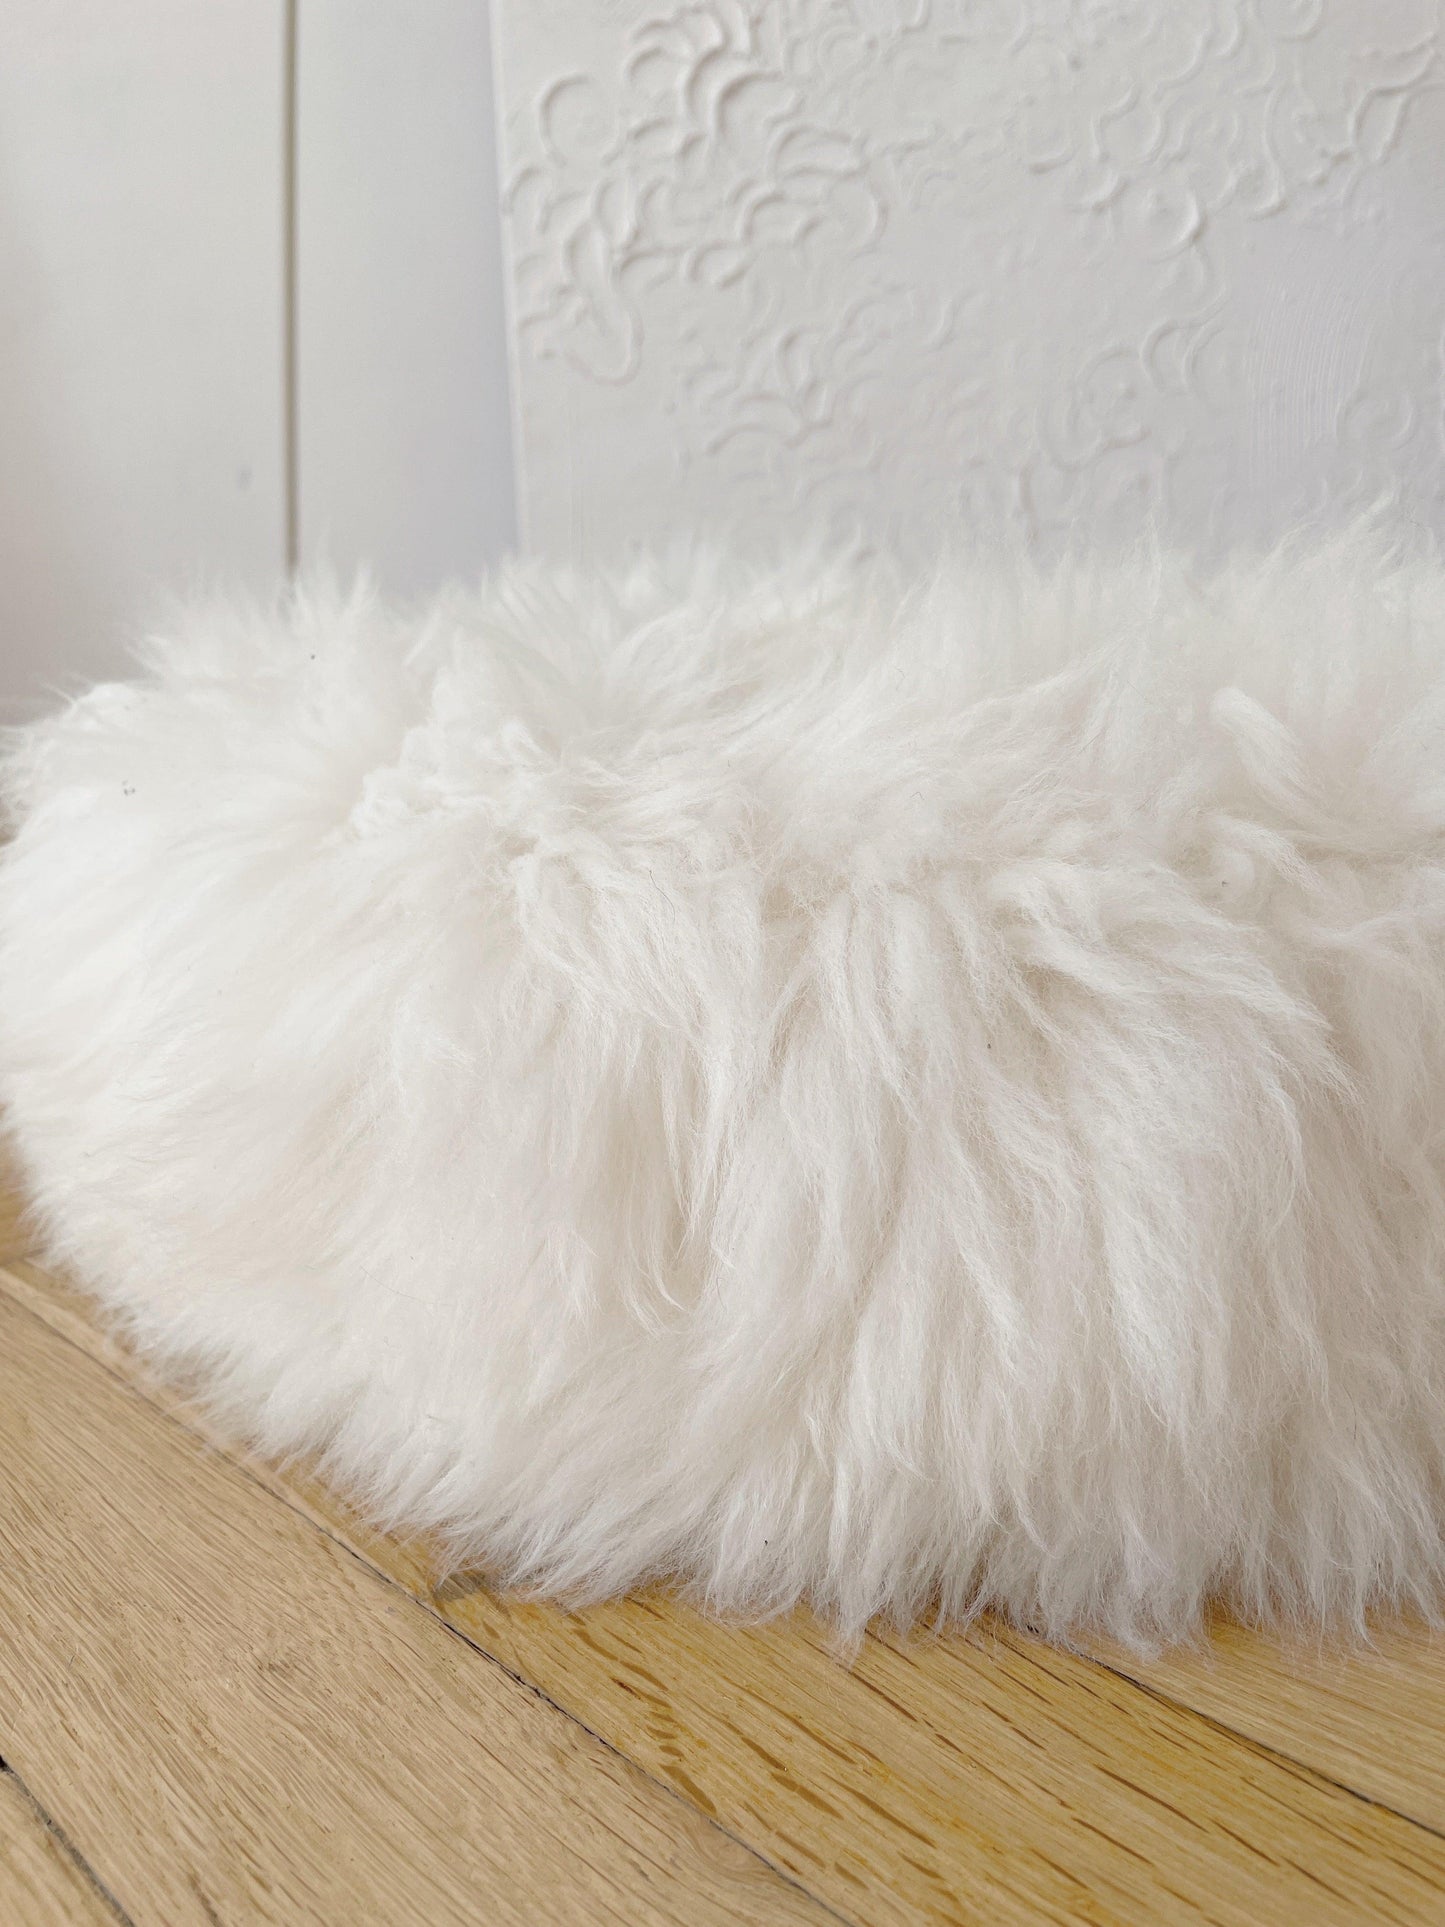 A Round Natural Sheepskin Pet Bed from Mellow Pet Store on a wooden floor, made of natural sheepskin.